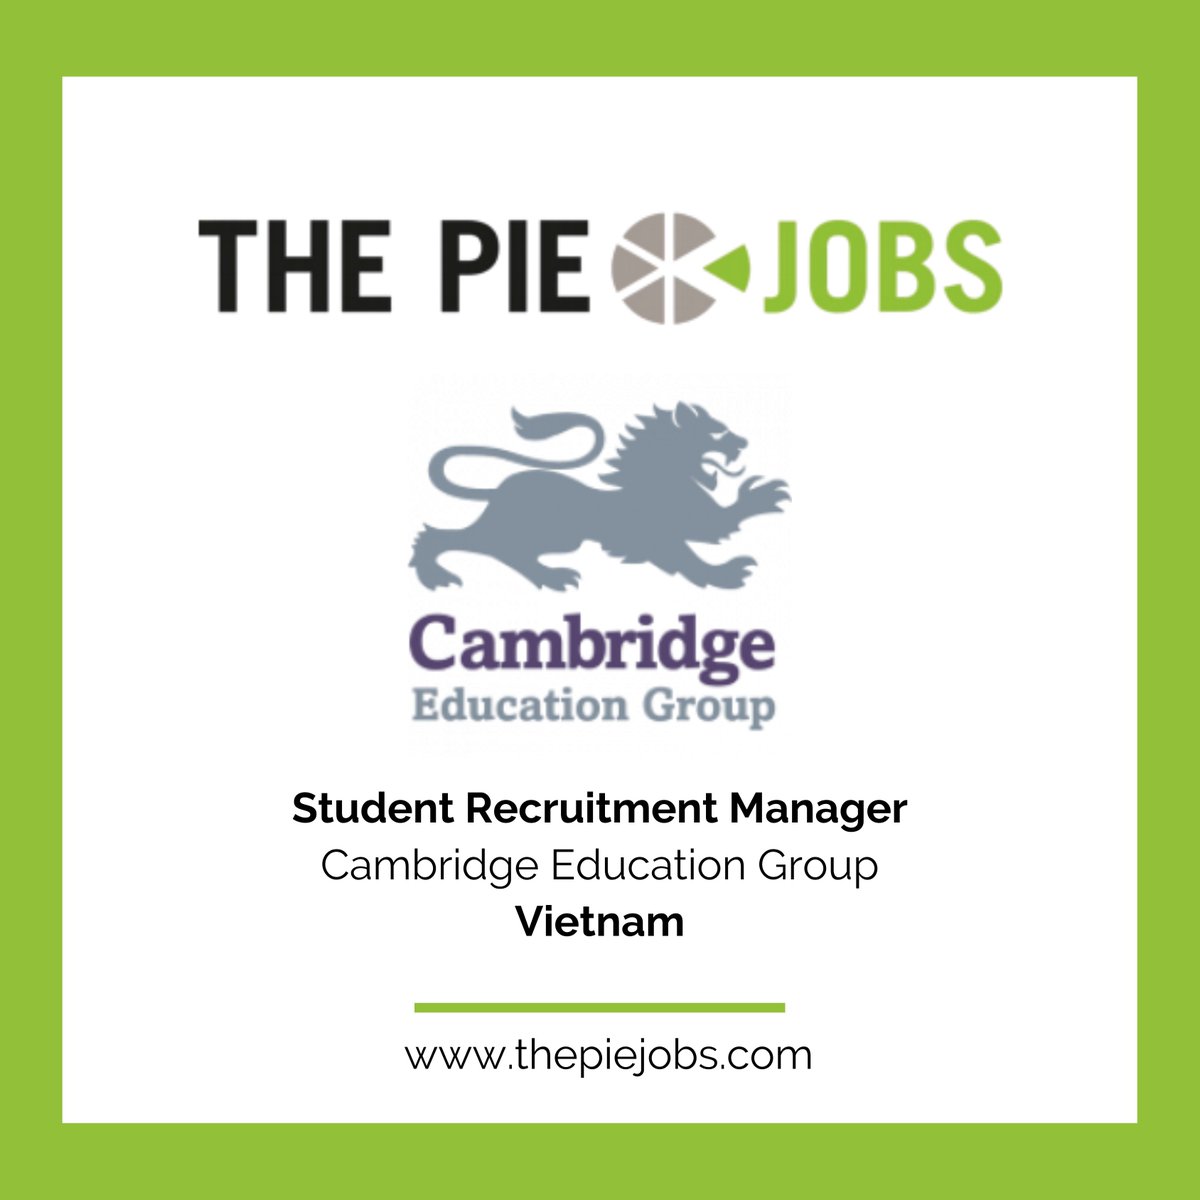 Cambridge Education Group is seeking a Student Recruitment #Manager based in #Vietnam to join their new team!

Interested? Apply by 22nd May:
hubs.li/Q02x2Yh70

#hiring #intled #newjob #studentrecruitment #HigherEd #globaleducation